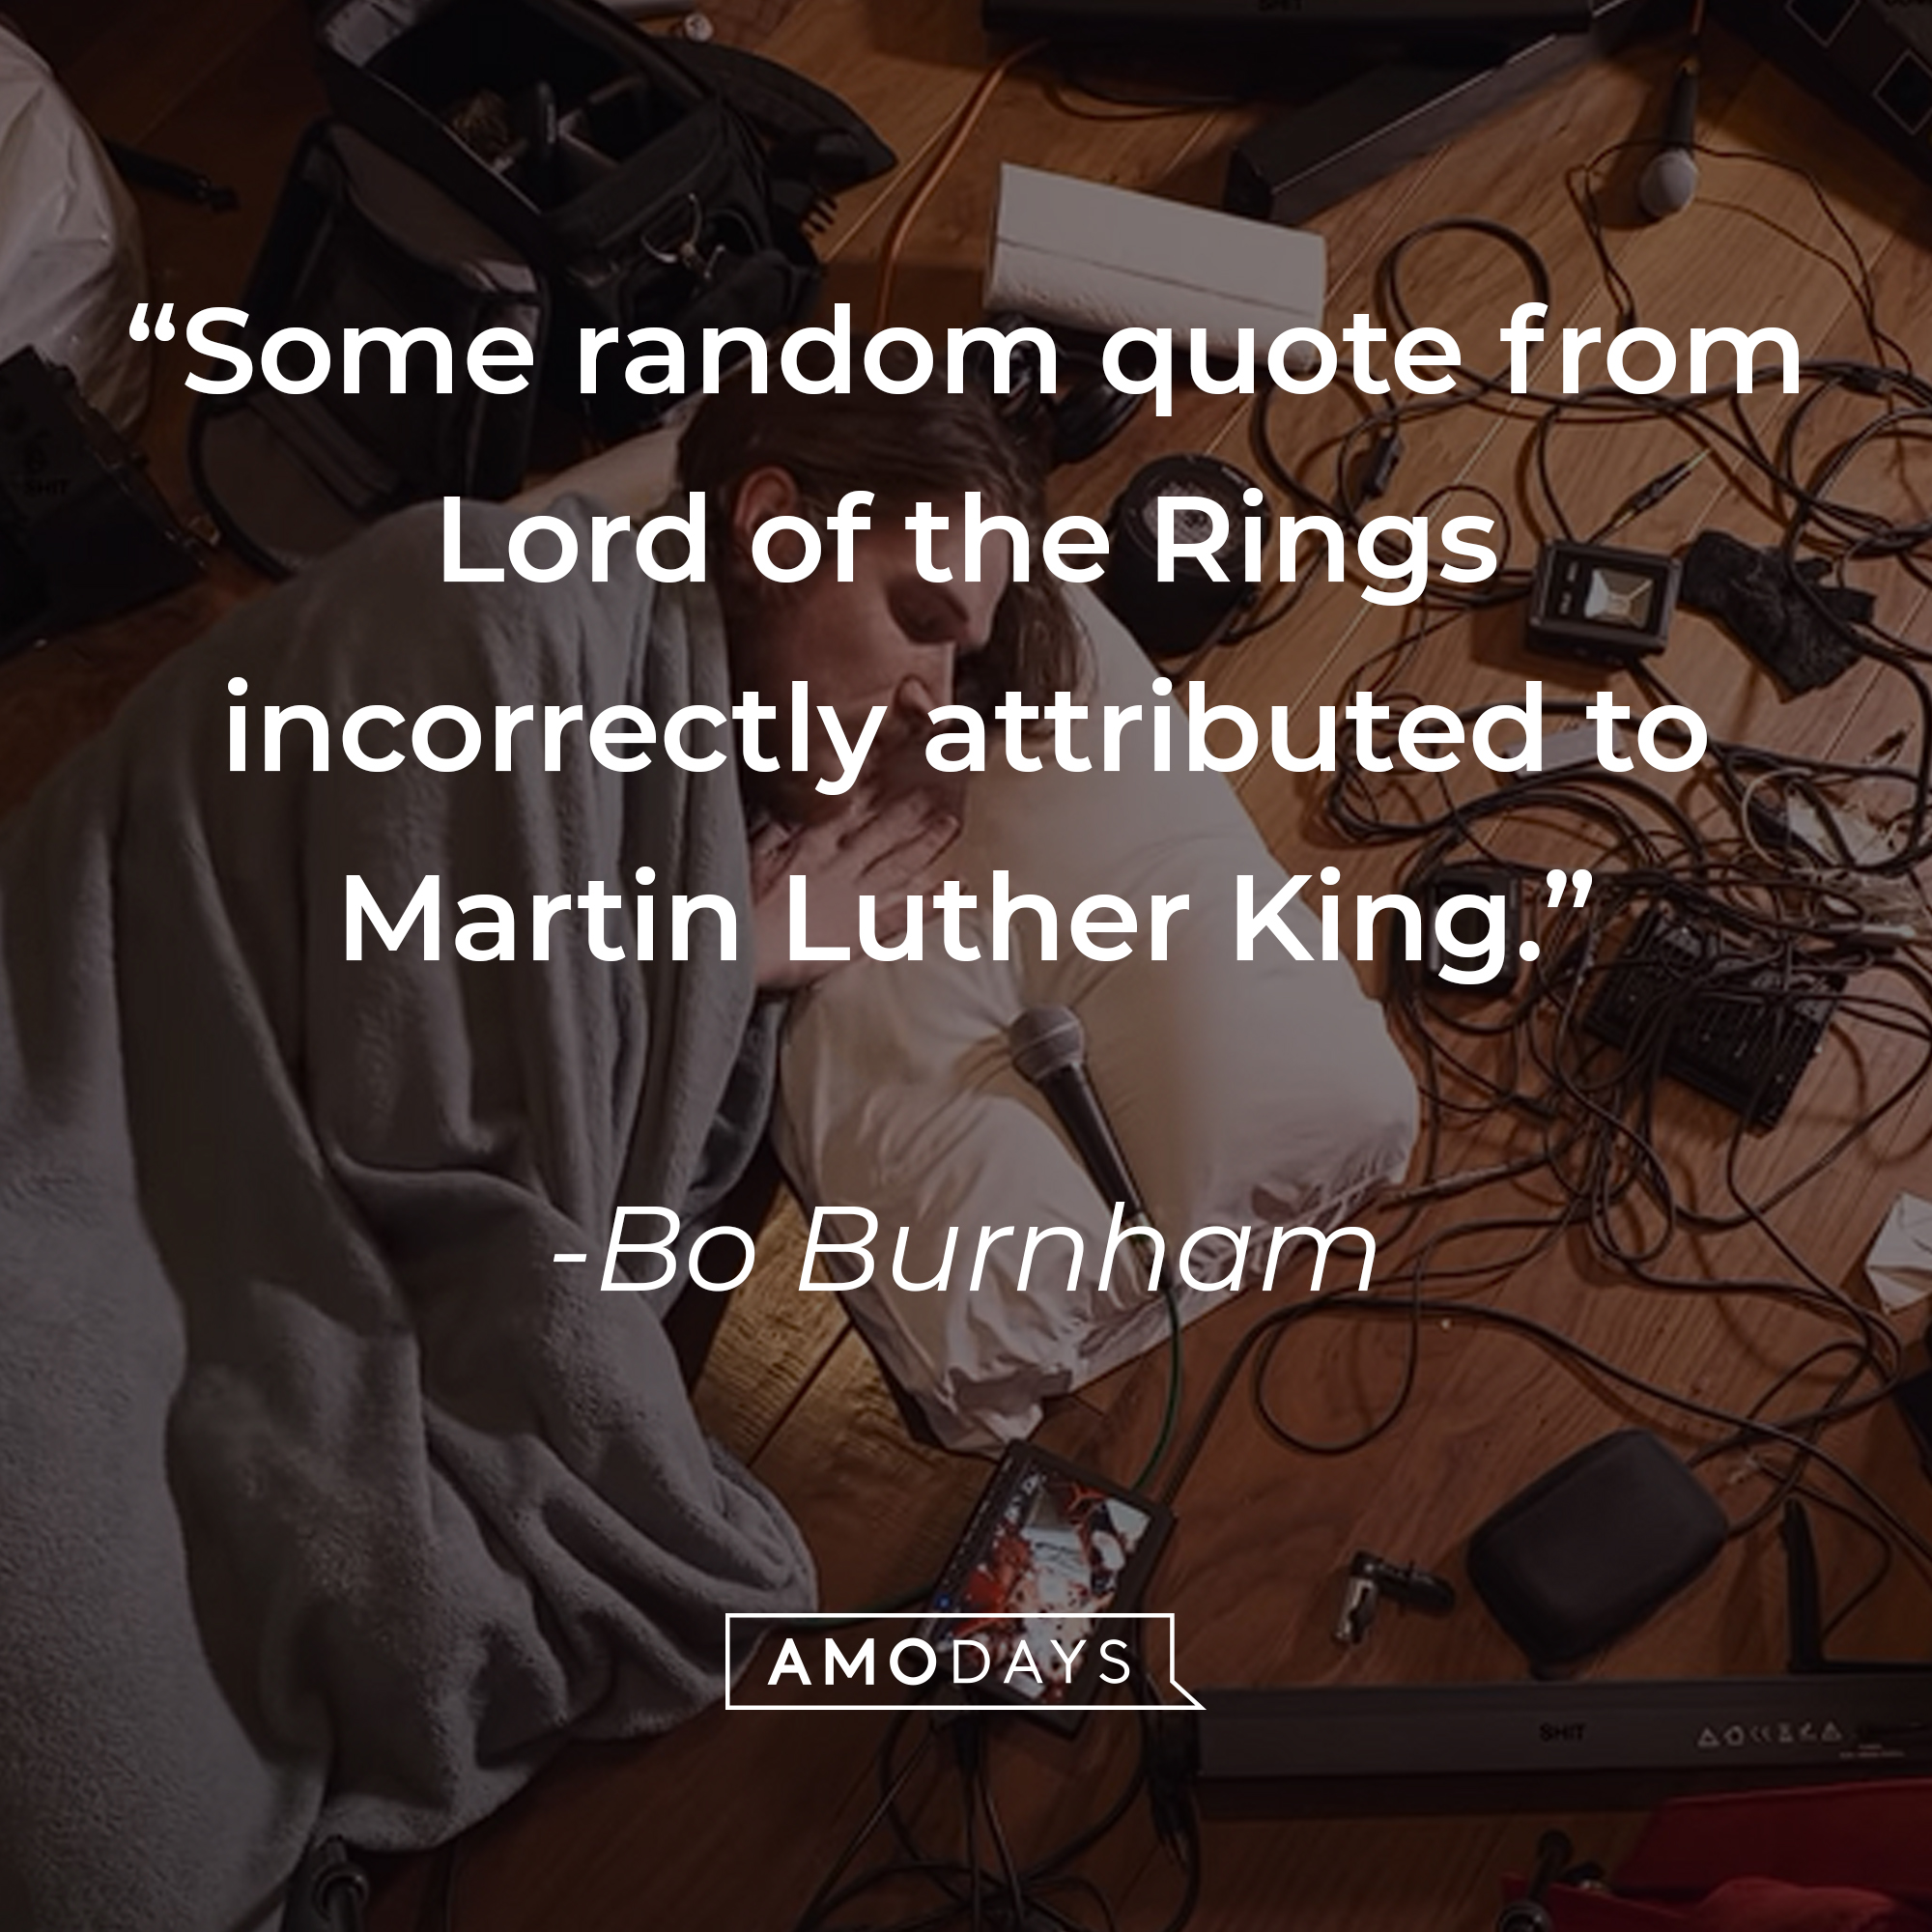 Bo Burnham's quote: "Some random quote from Lord of the Rings incorrectly attributed to Martin Luther King." | Source: youtube.com/boburnham